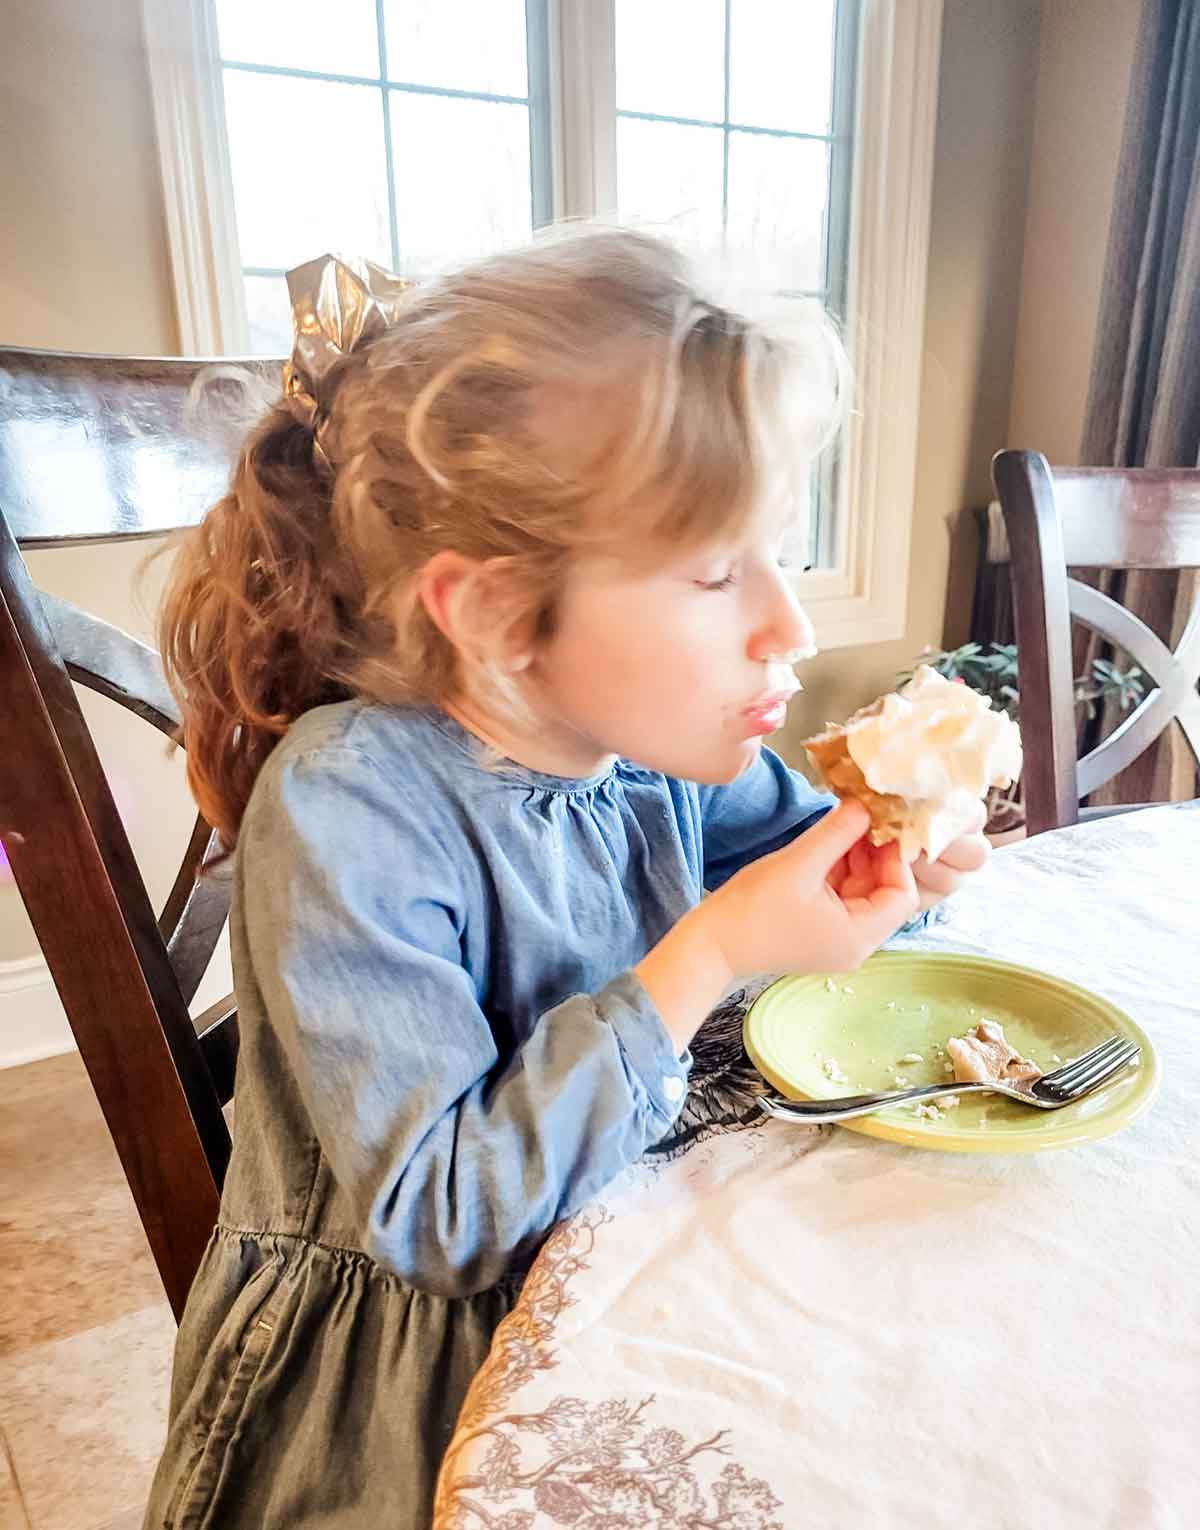 Little girl with her eyes closed taking a bite out of a piece of pumpkin pie.